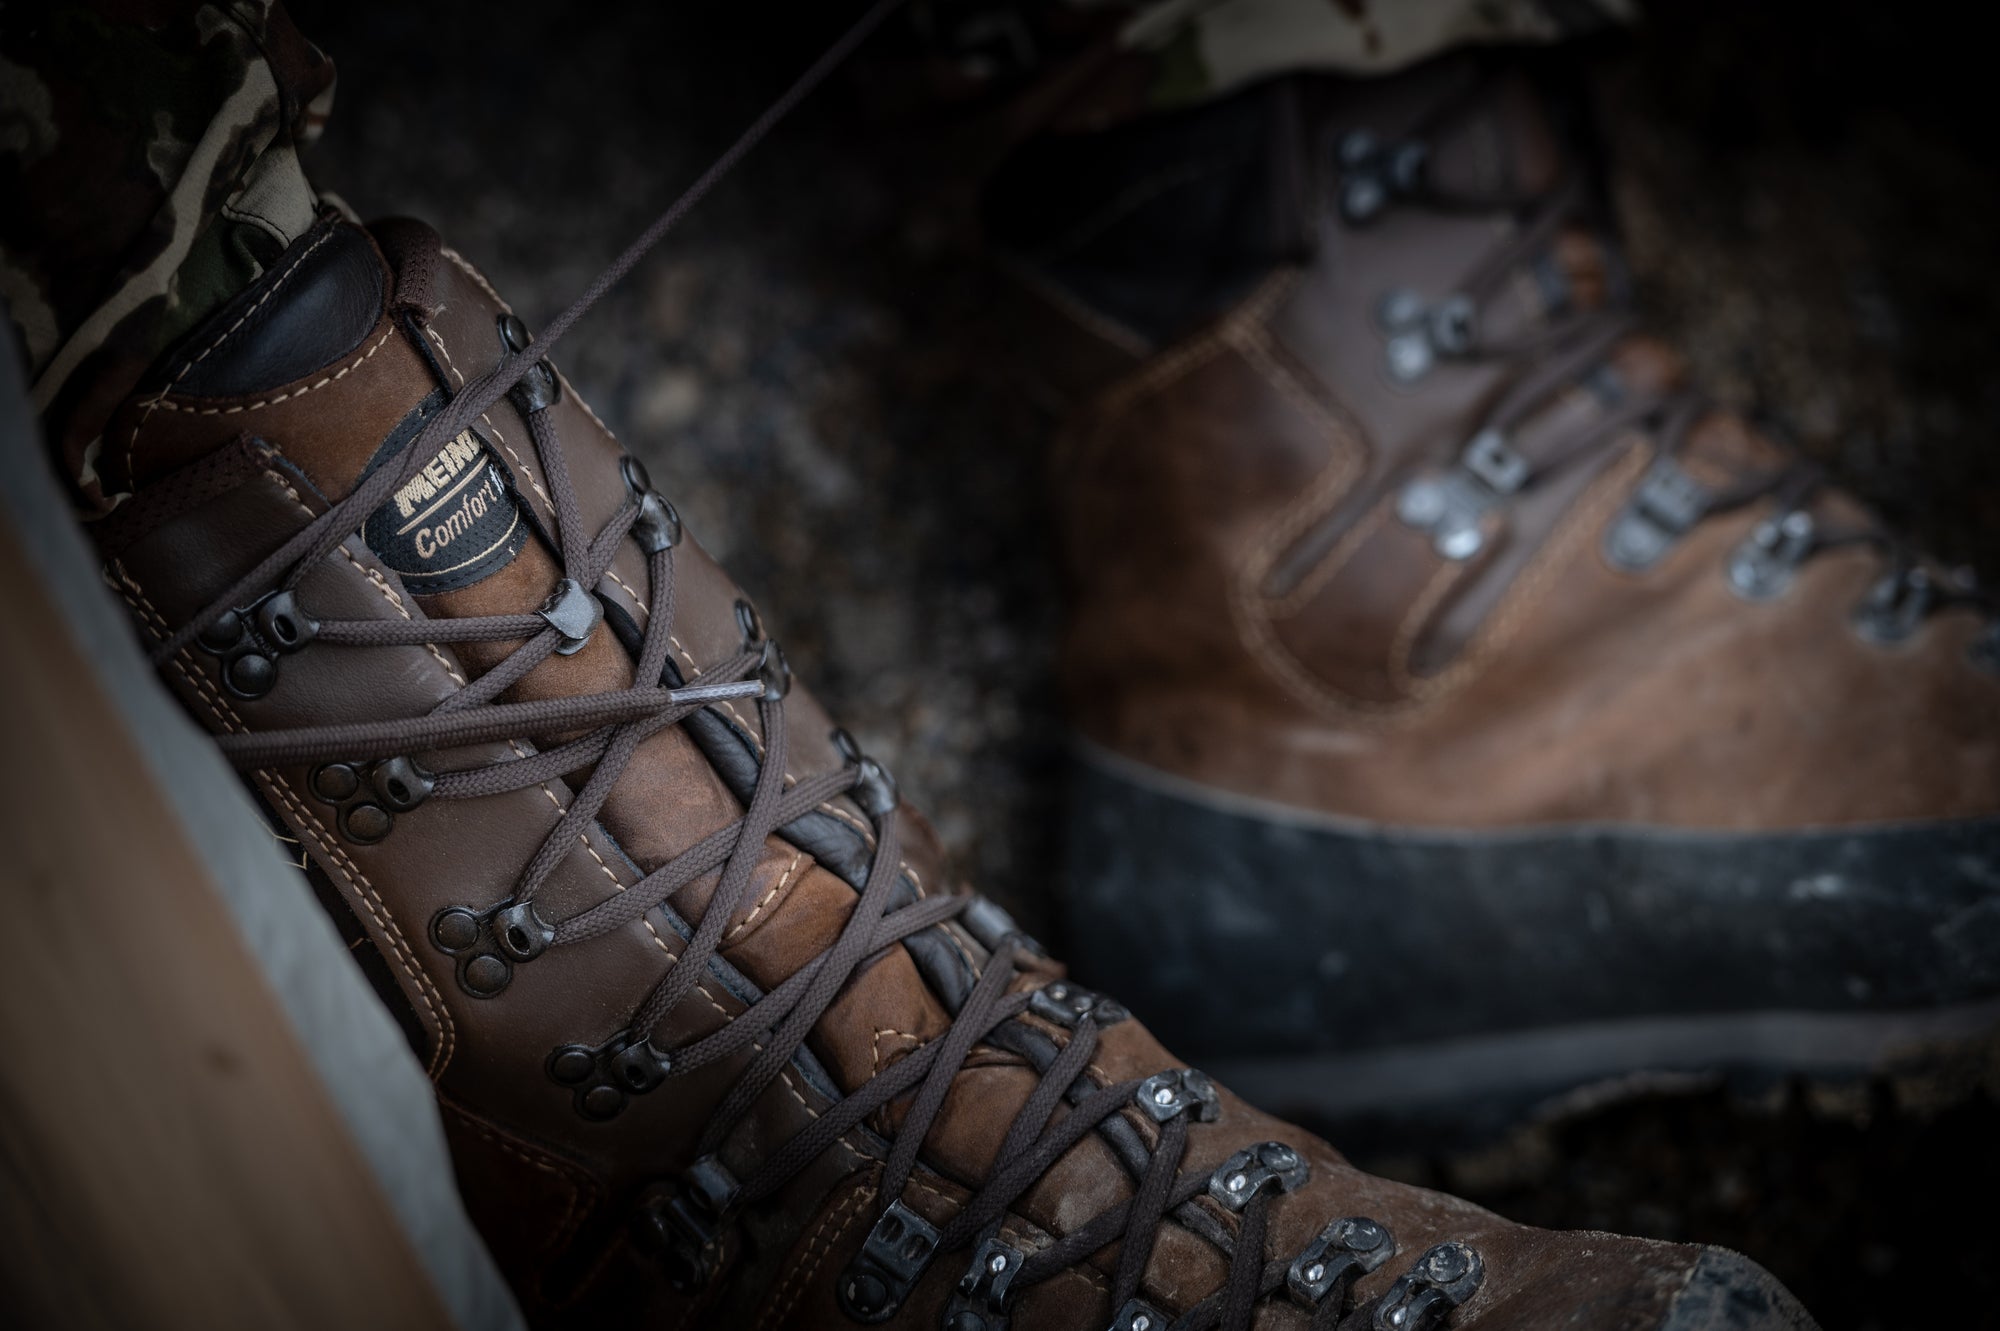 Hunting Boots